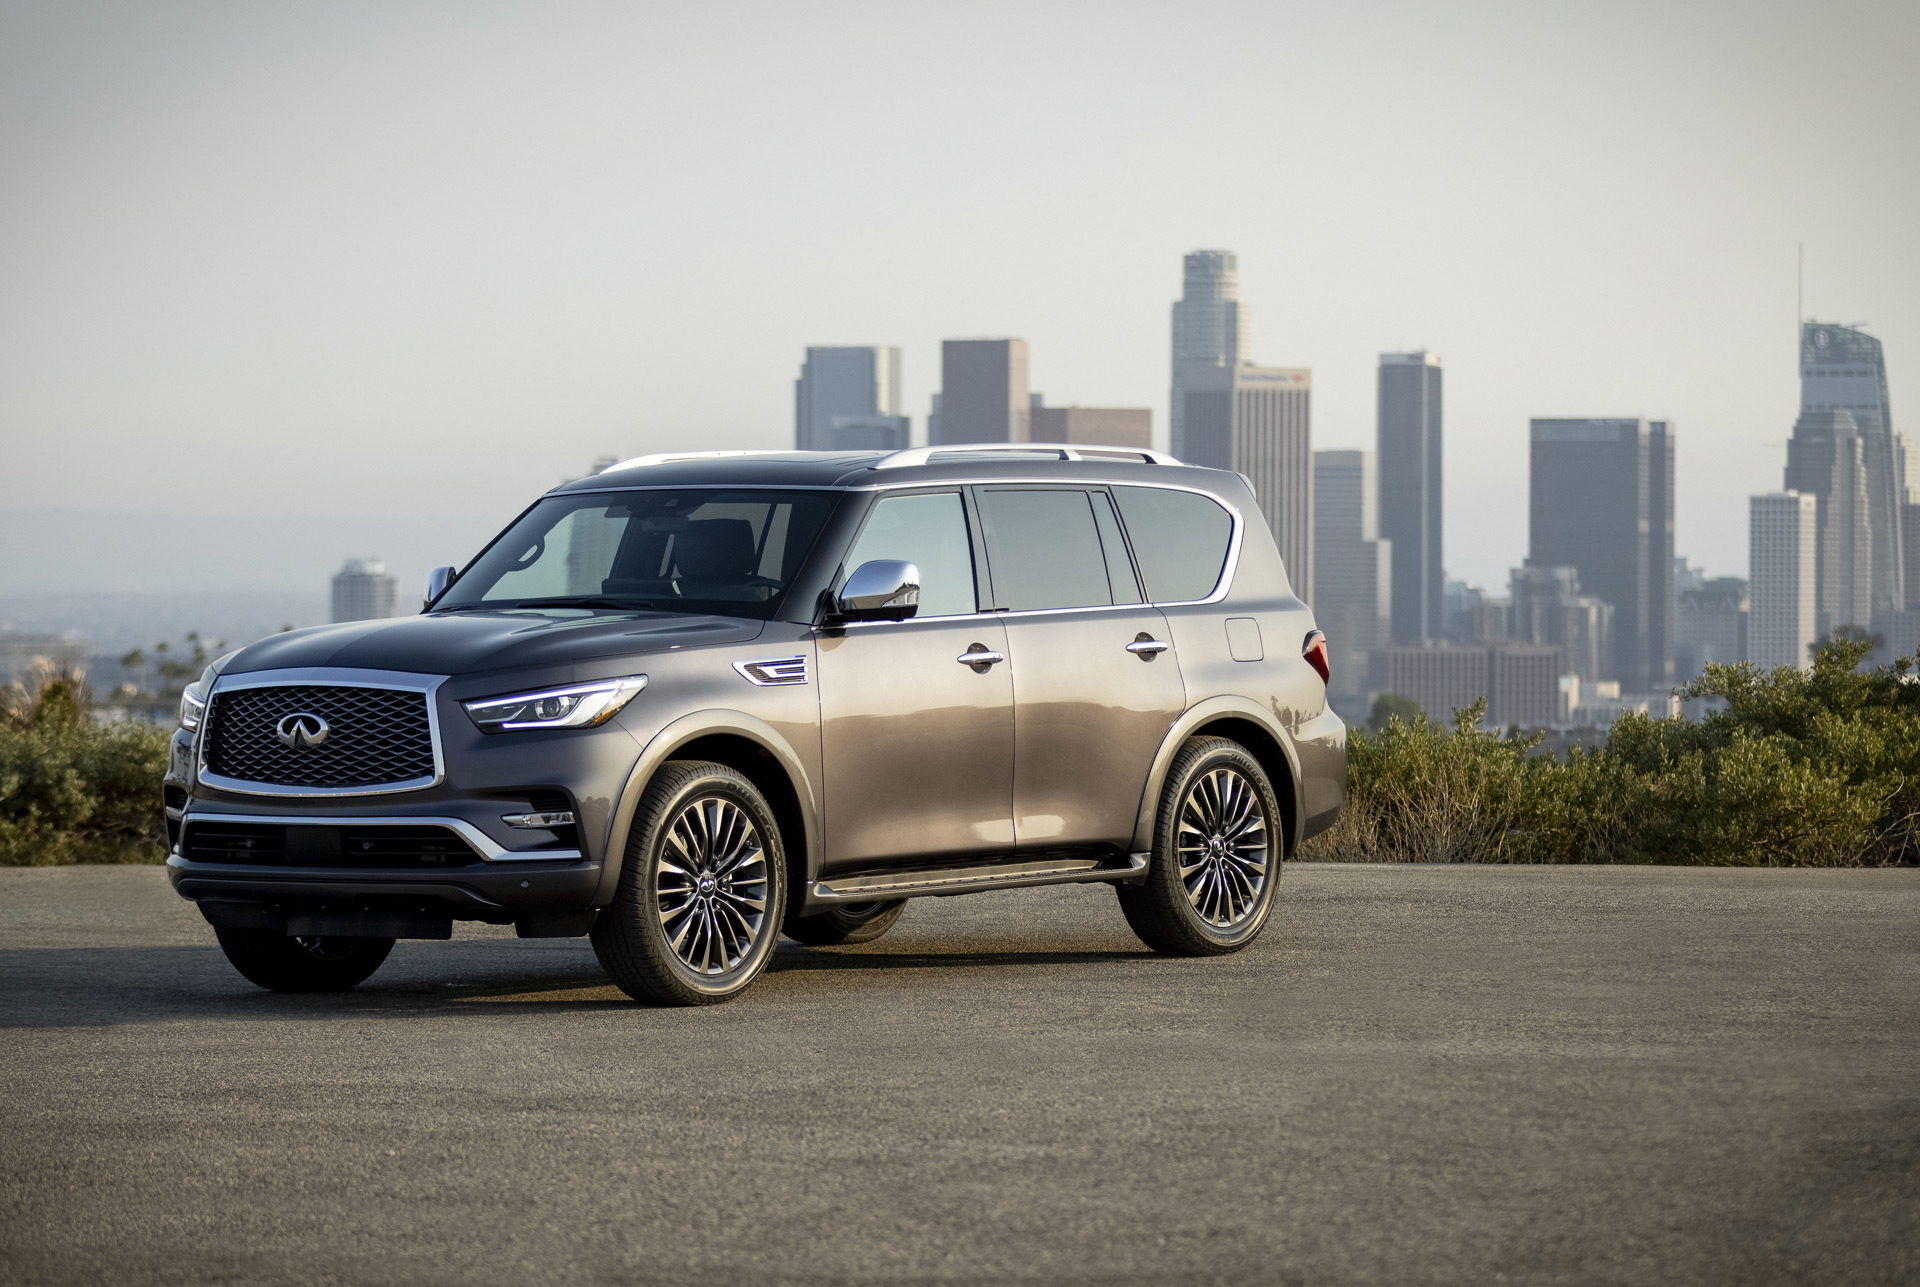 Preview: 2022 Infiniti QX80 arrives with new infotainment display screen for $71,995 Auto Recent